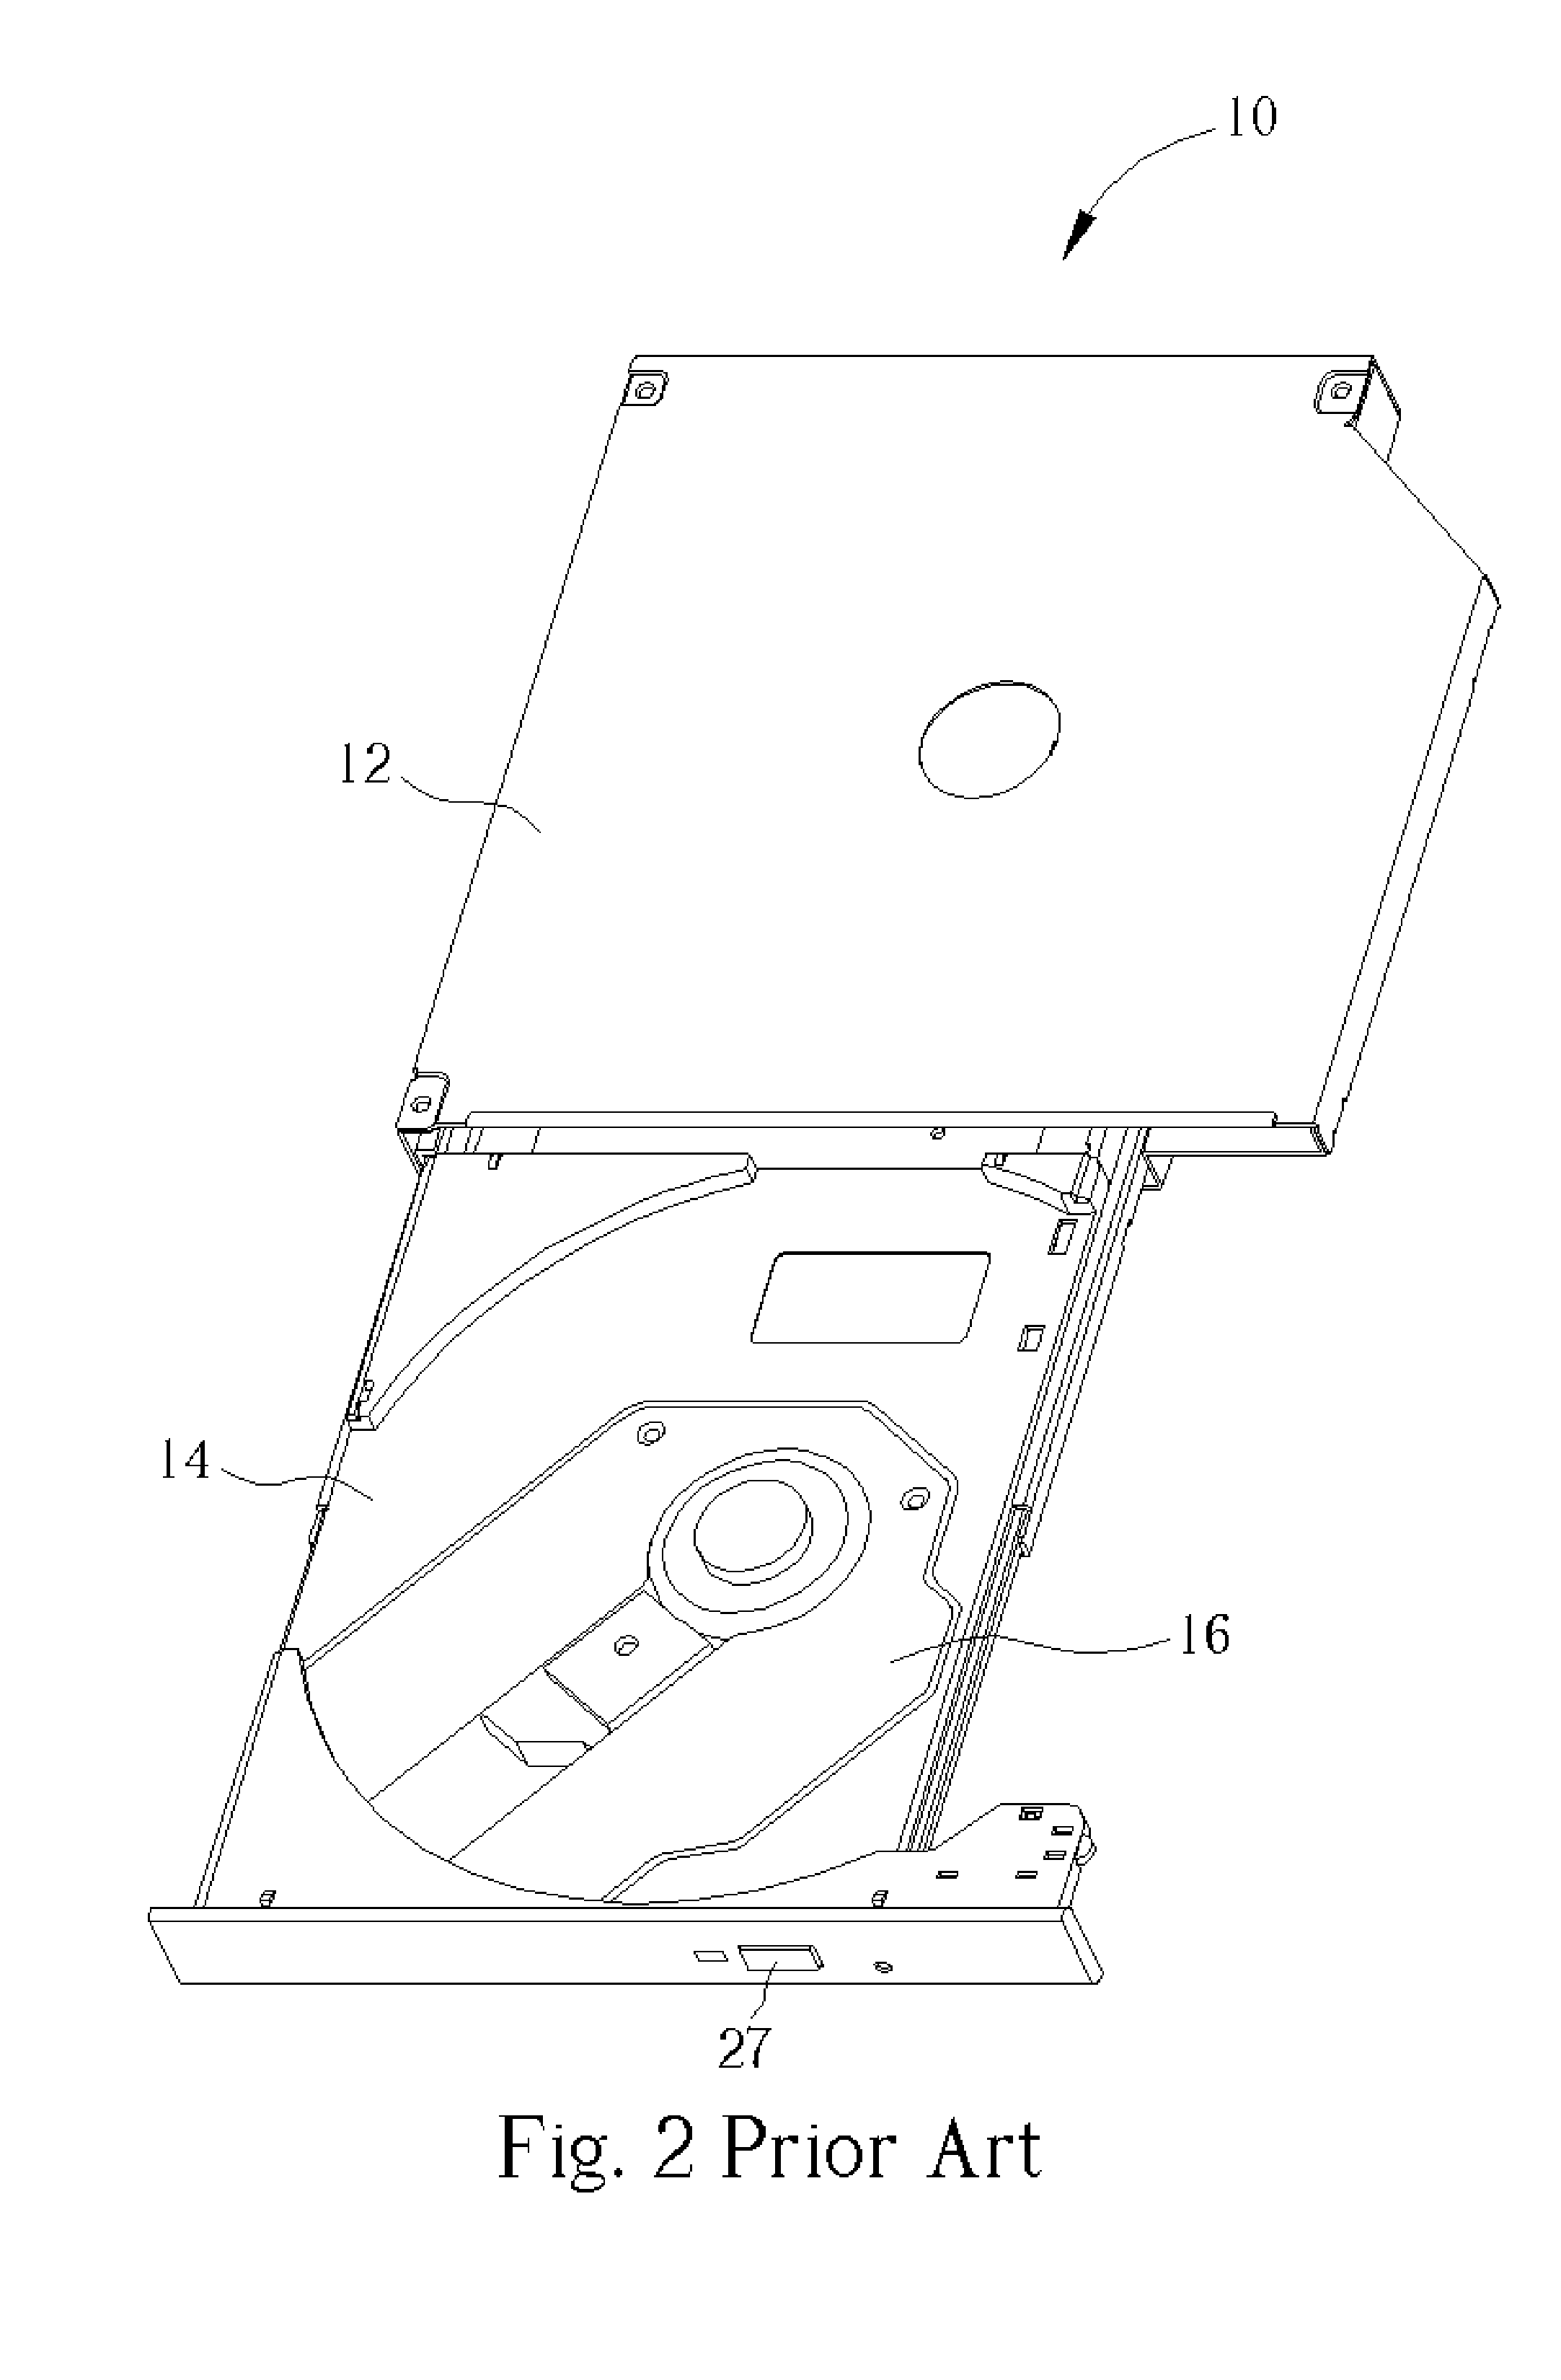 Optical disc drive which can firmly fix the tray within the housing